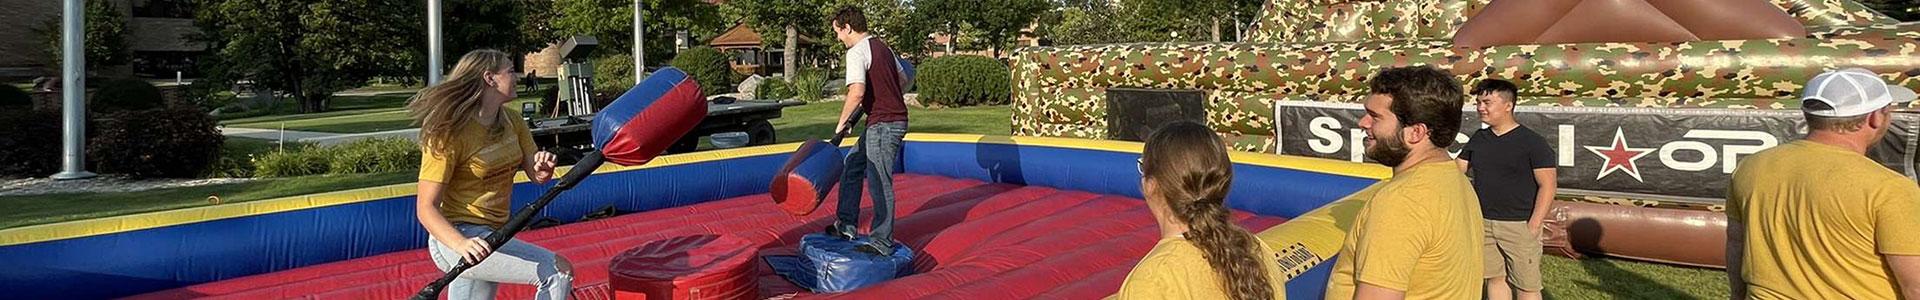 Students battling on giant blow up toys on the Campus Mall